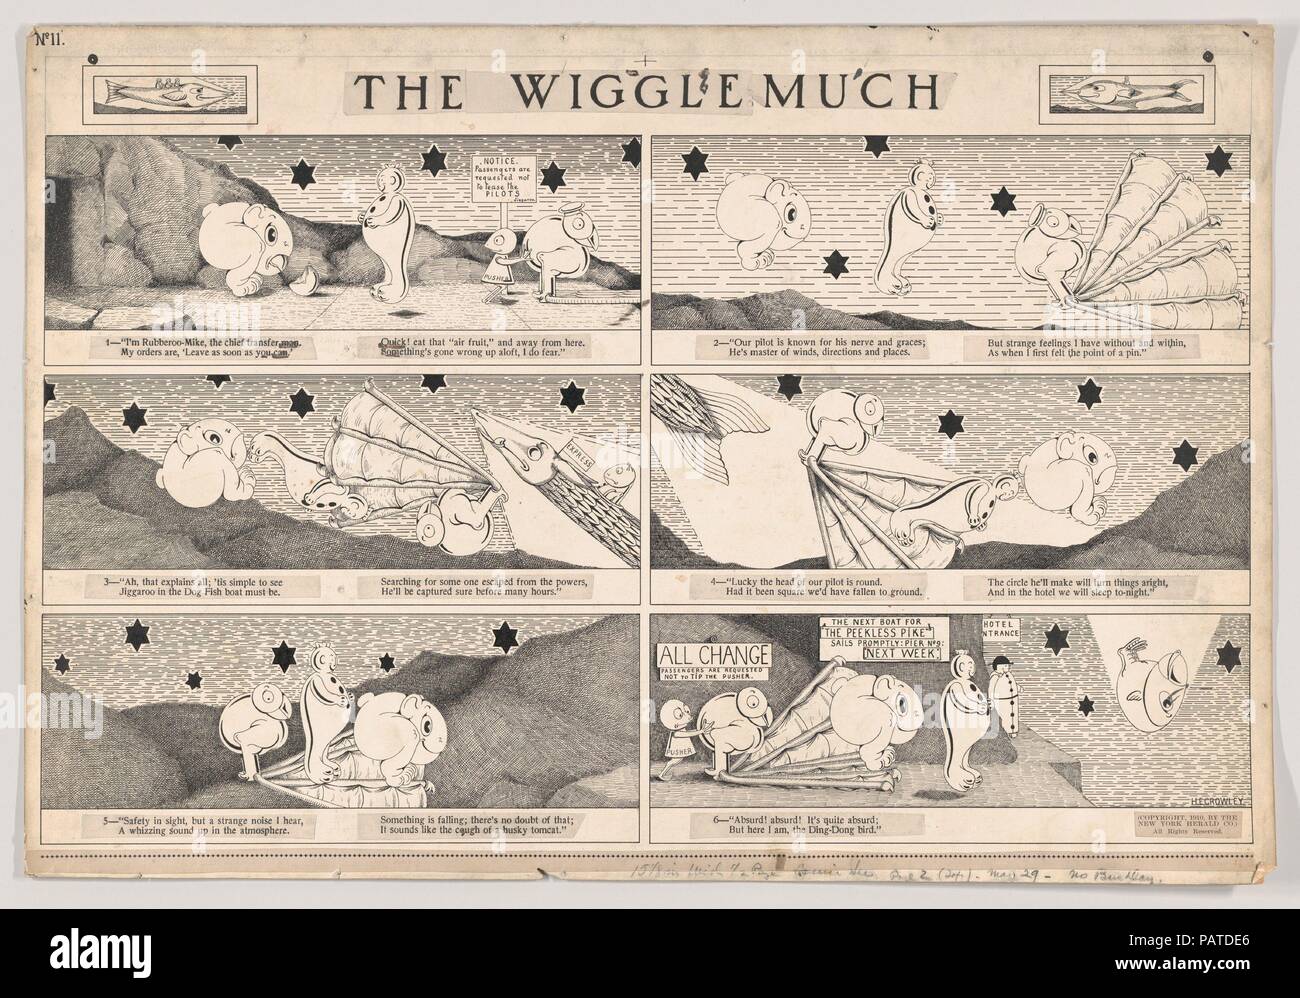 Dummy for 'The Wiggle Much' Comic Strip, Number 11 (published by The New York Herald, May 29, 1910). Artist: Herbert E. Crowley (British, London 1873-1939 Zurich). Dimensions: Sheet: 14 5/8 × 21 9/16 in. (37.2 × 54.7 cm). Date: 1910. Museum: Metropolitan Museum of Art, New York, USA. Stock Photo